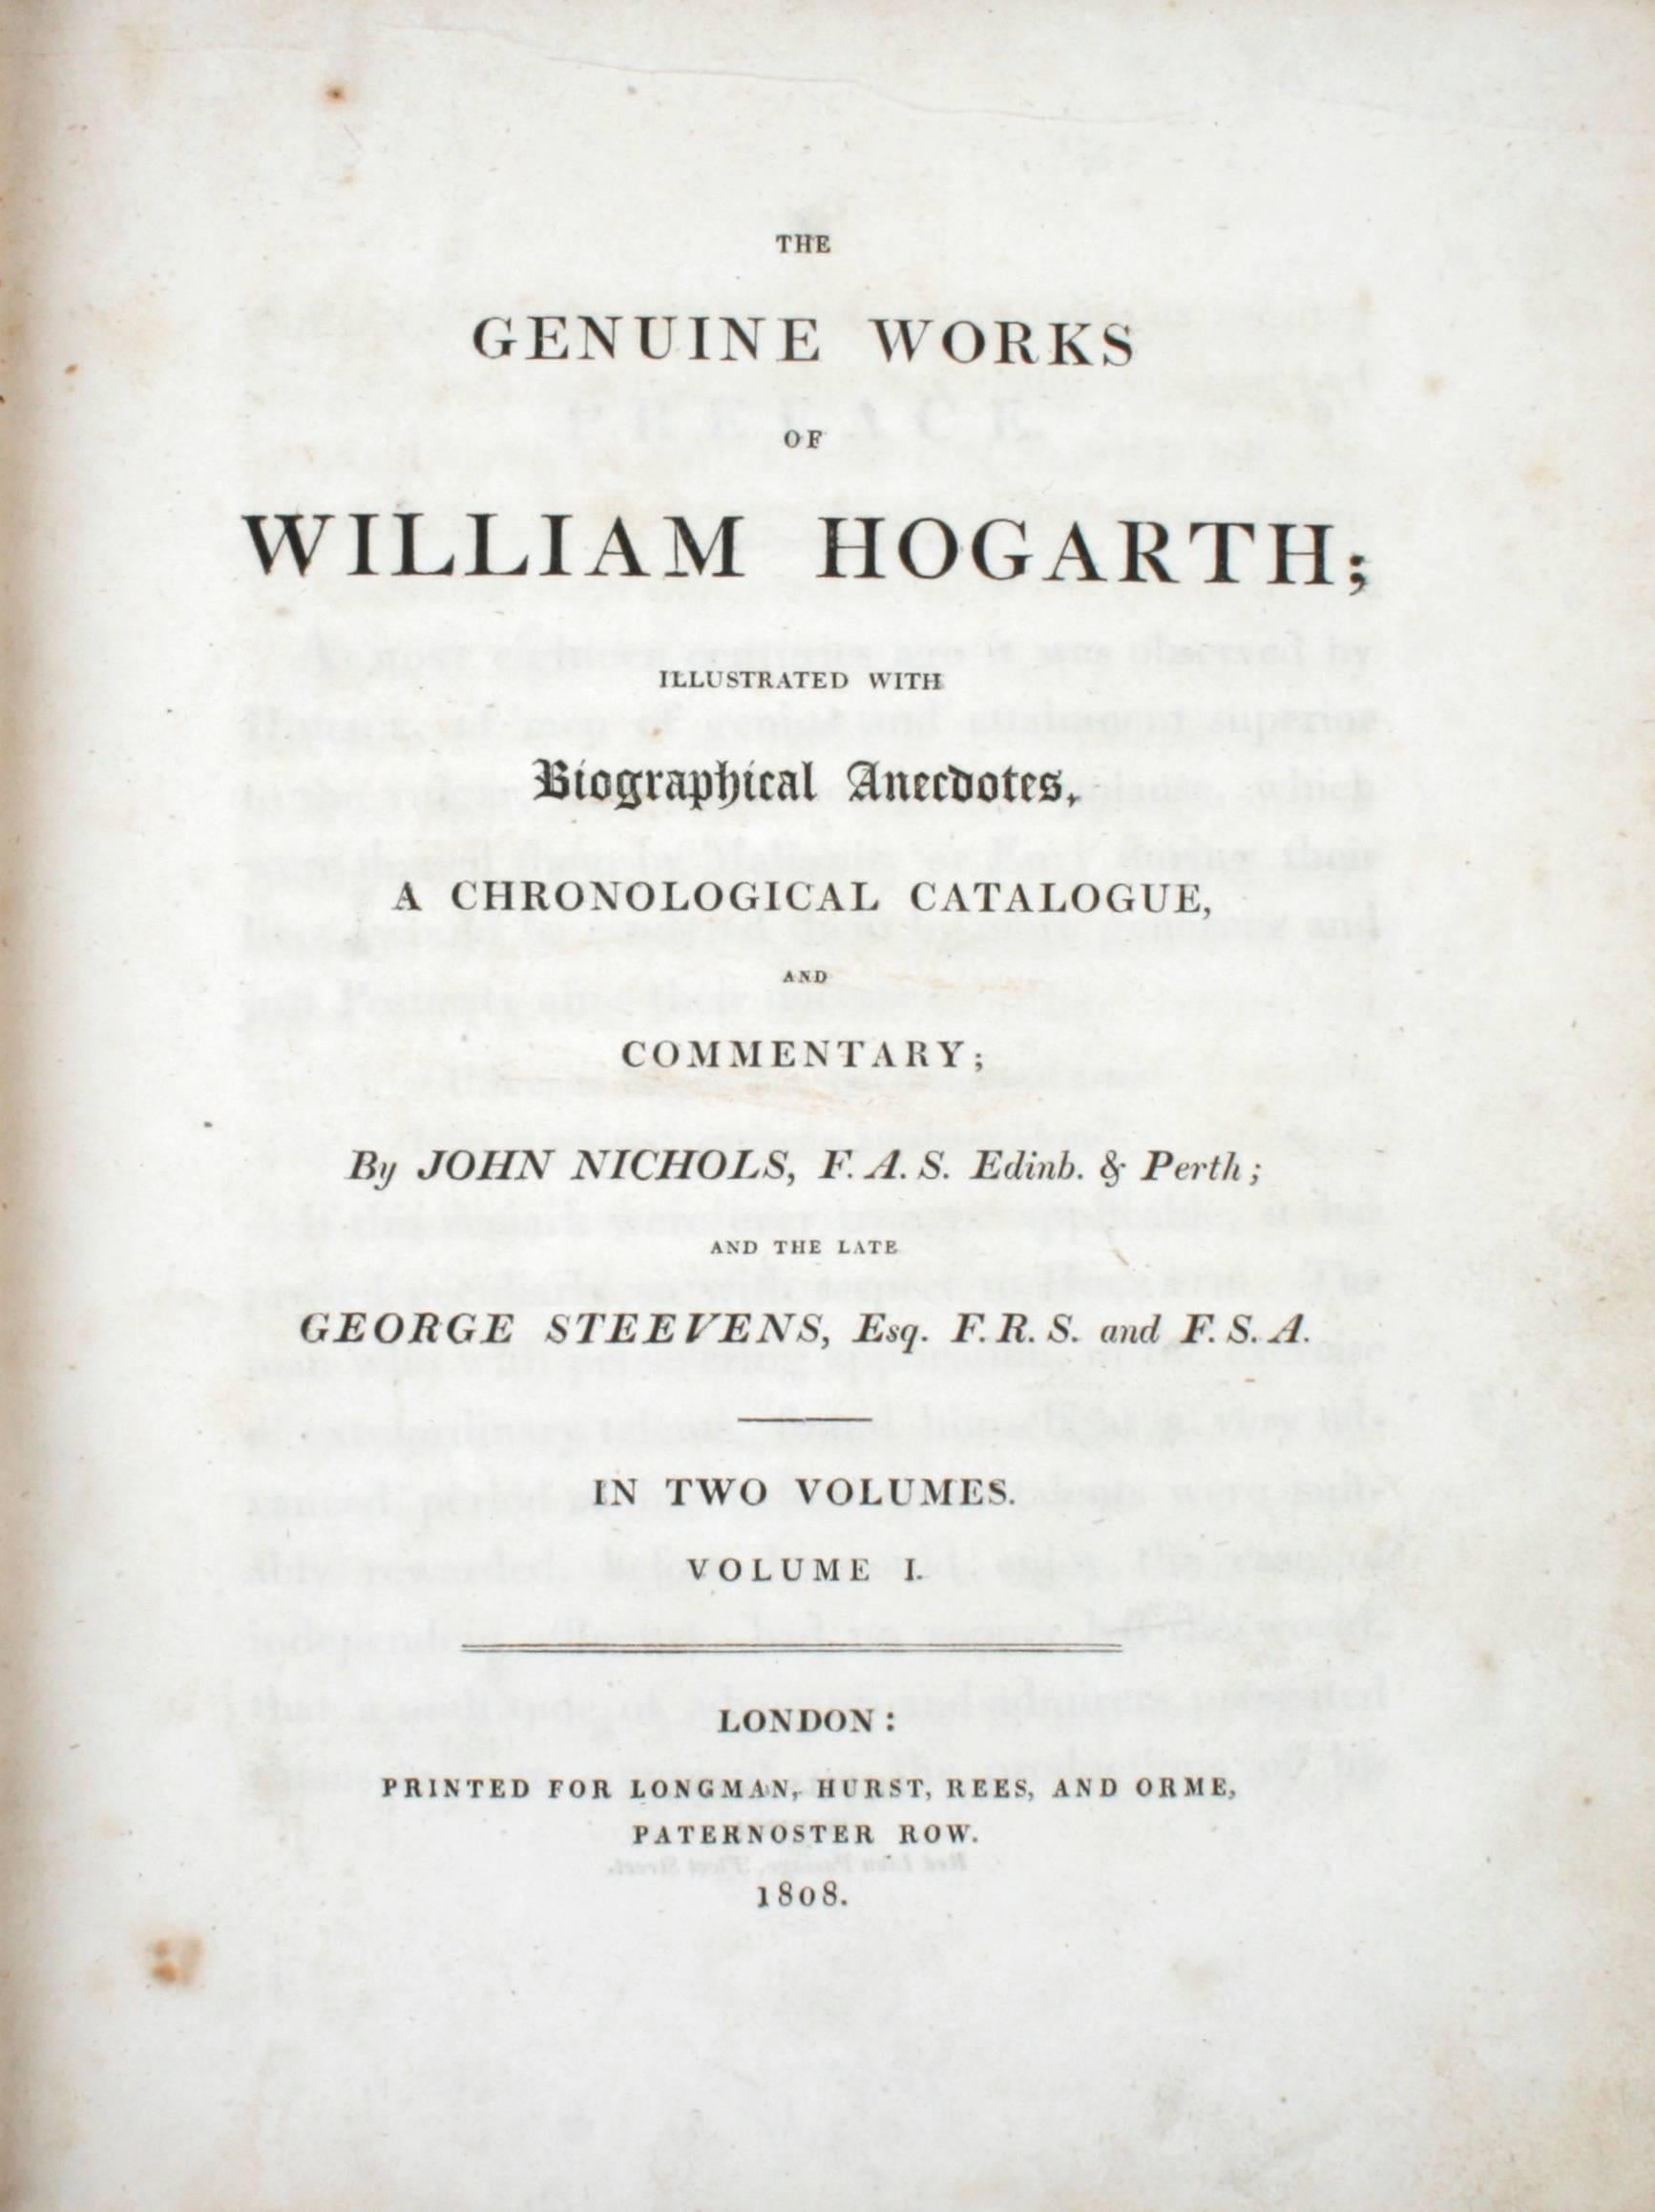 The Genuine Works of William Hogarth Illustrated with Biographical Anecdotes. Volume I, London: Longman, Hurst, Rees, and Orme, 1808. First edition hardcover. 524 pp. Volume II, London: Longman, Hurst, Rees, and Orme, 1810. First edition hardcover.